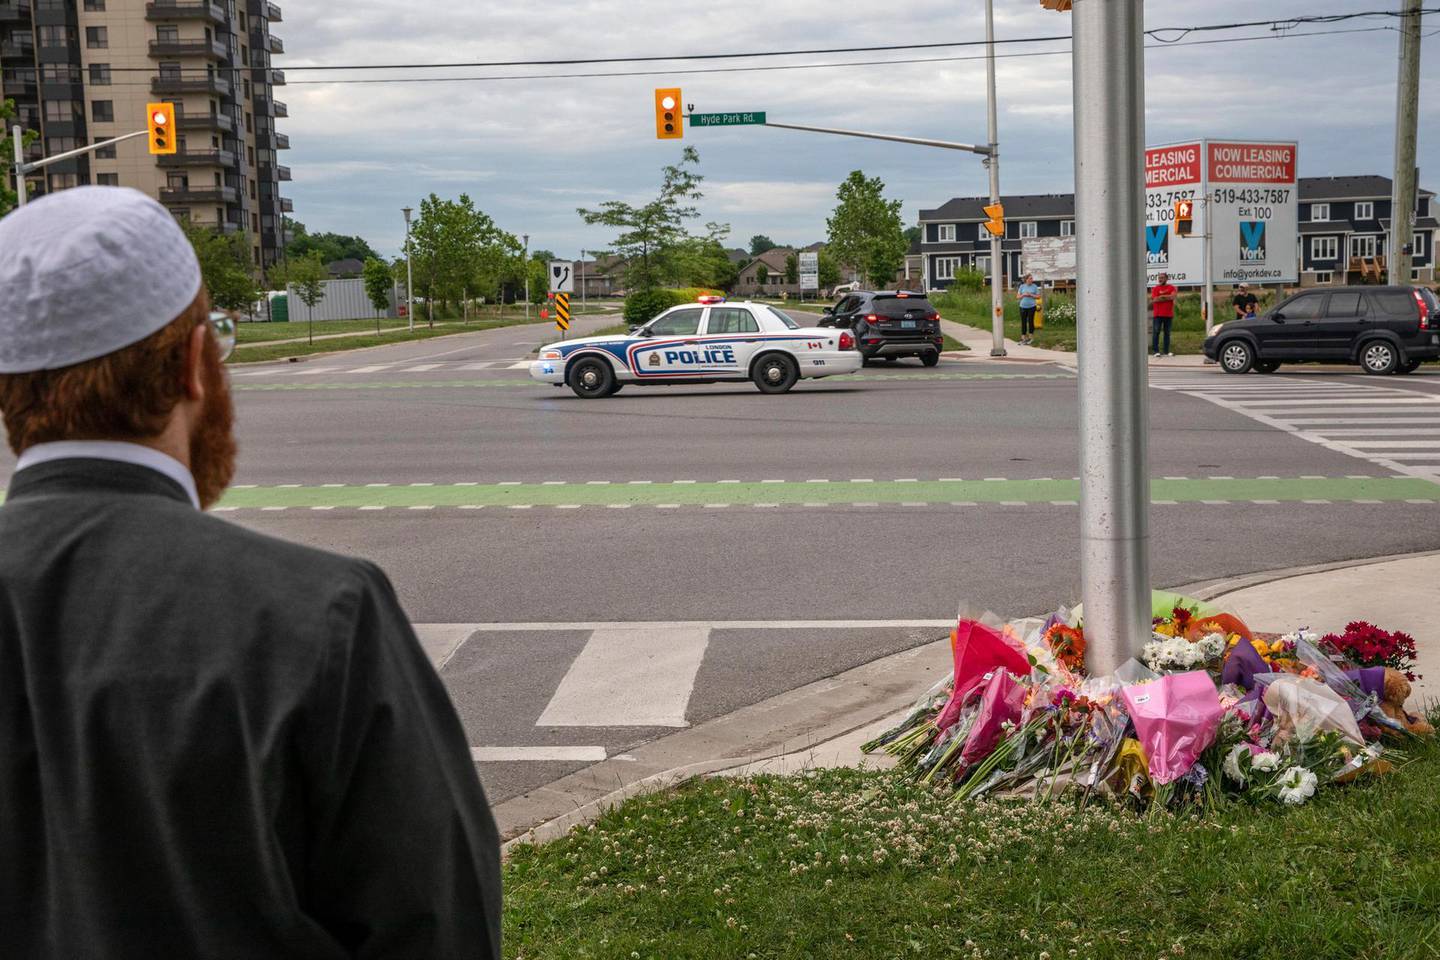 A police car passes the location where a family of five was hit by a driver, in London, Ontario, Monday, June 7, 2021. Four of the members of the family died and one is in critical condition. A 20-year-old male has been charged with four counts of first degree murder and count of attempted murder in connection with the crime. (Brett Gundlock/The Canadian Press via AP)